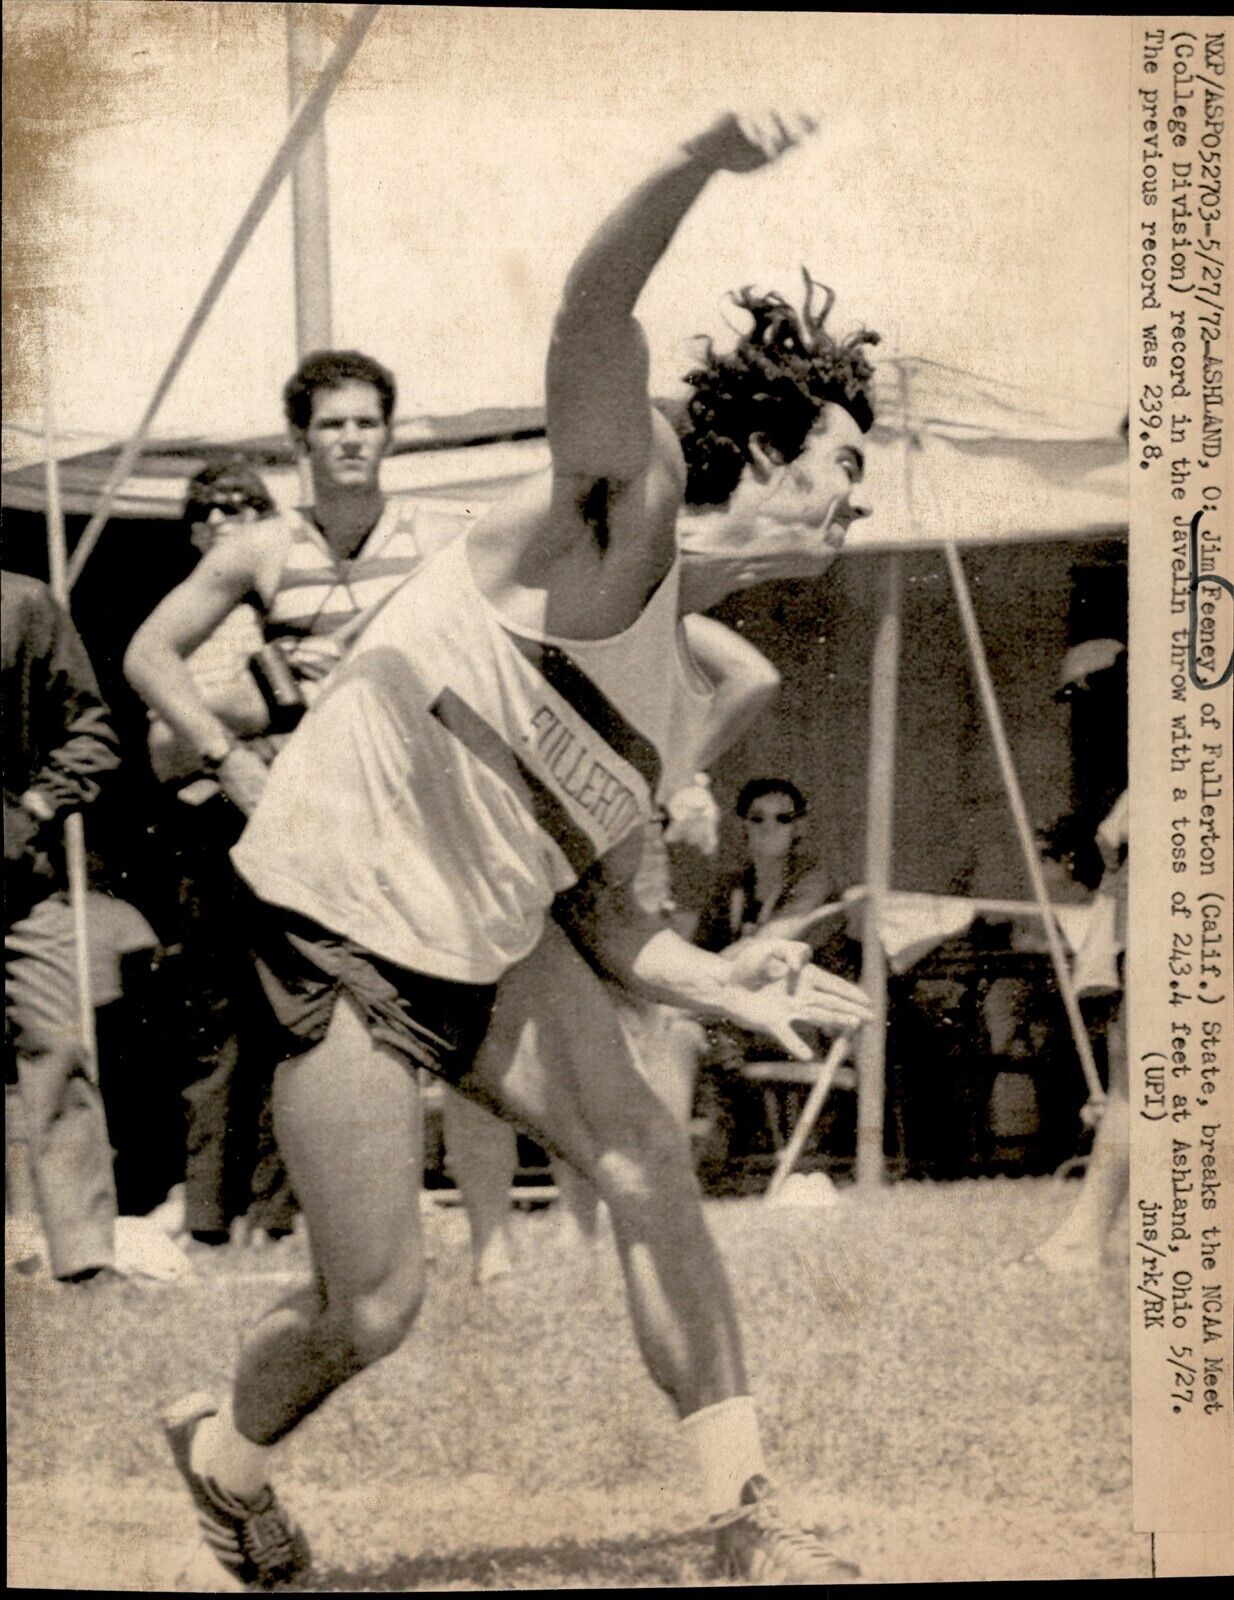 LD277 1972 UPI Wire Photo JIM FEENEY OF FULLERTON STATE NCAA WEST JAVELIN RECORD